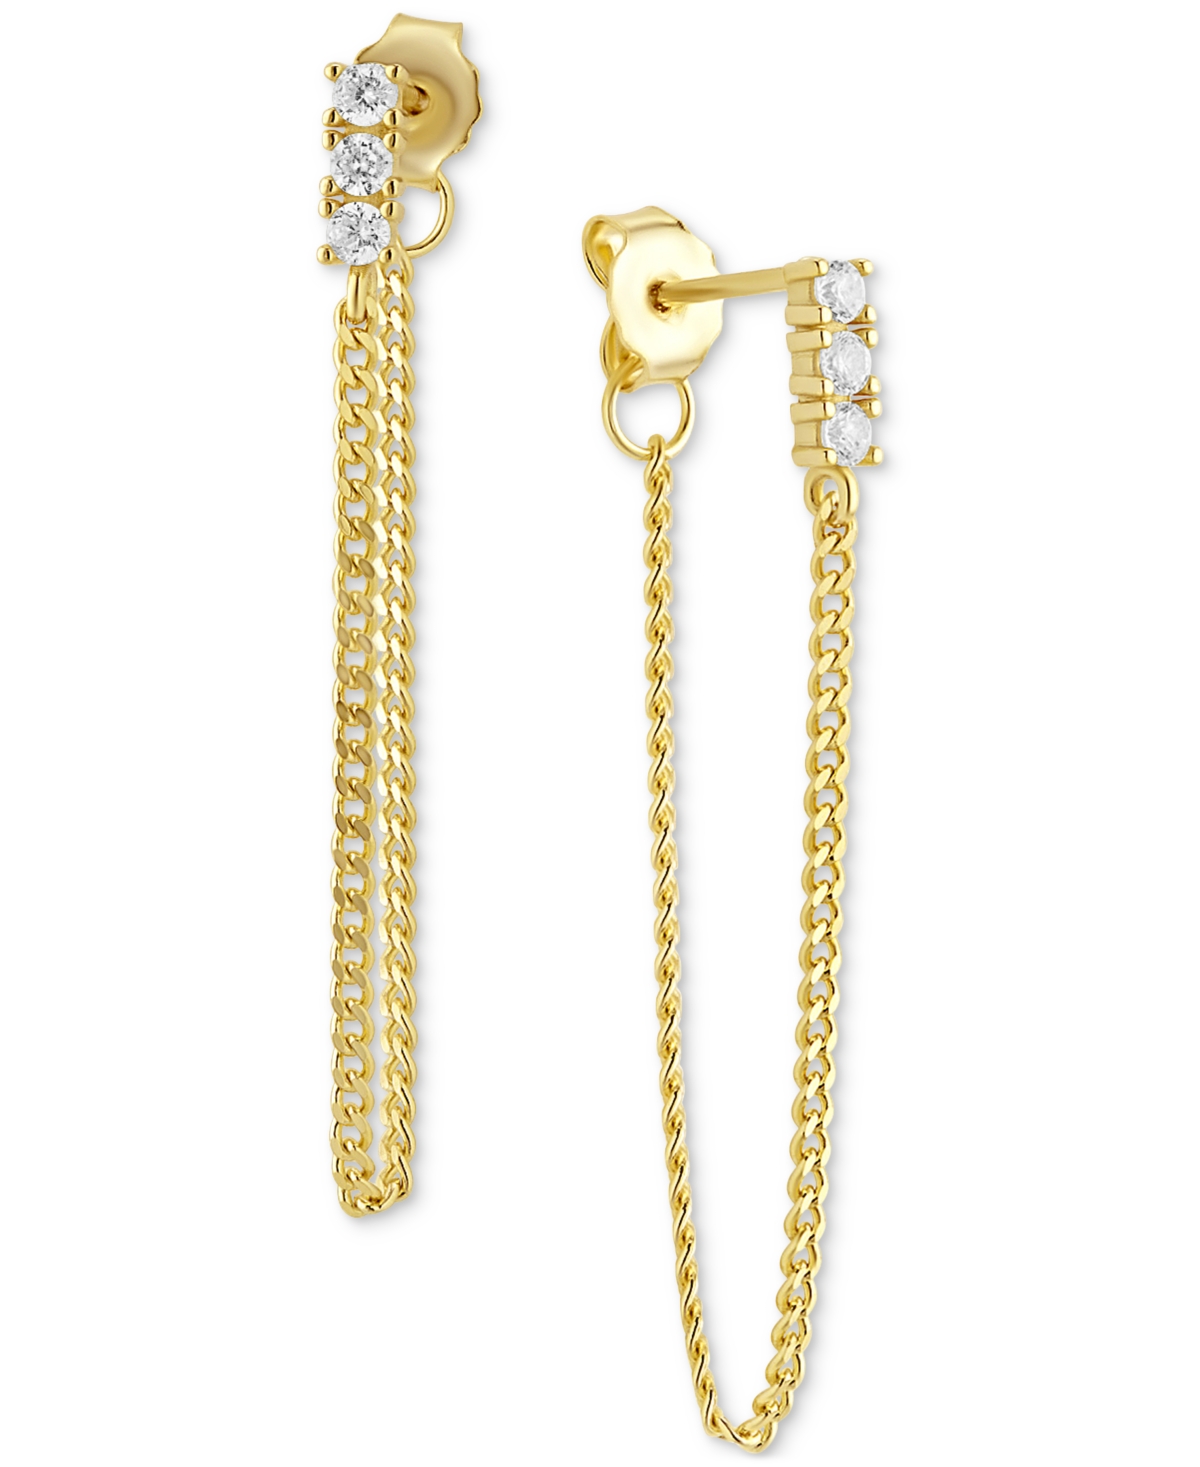 Giani Bernini Cubic Zirconia Bar Chain Front To Back Drop Earrings In 18k Gold-plated Sterling Silver, Created For